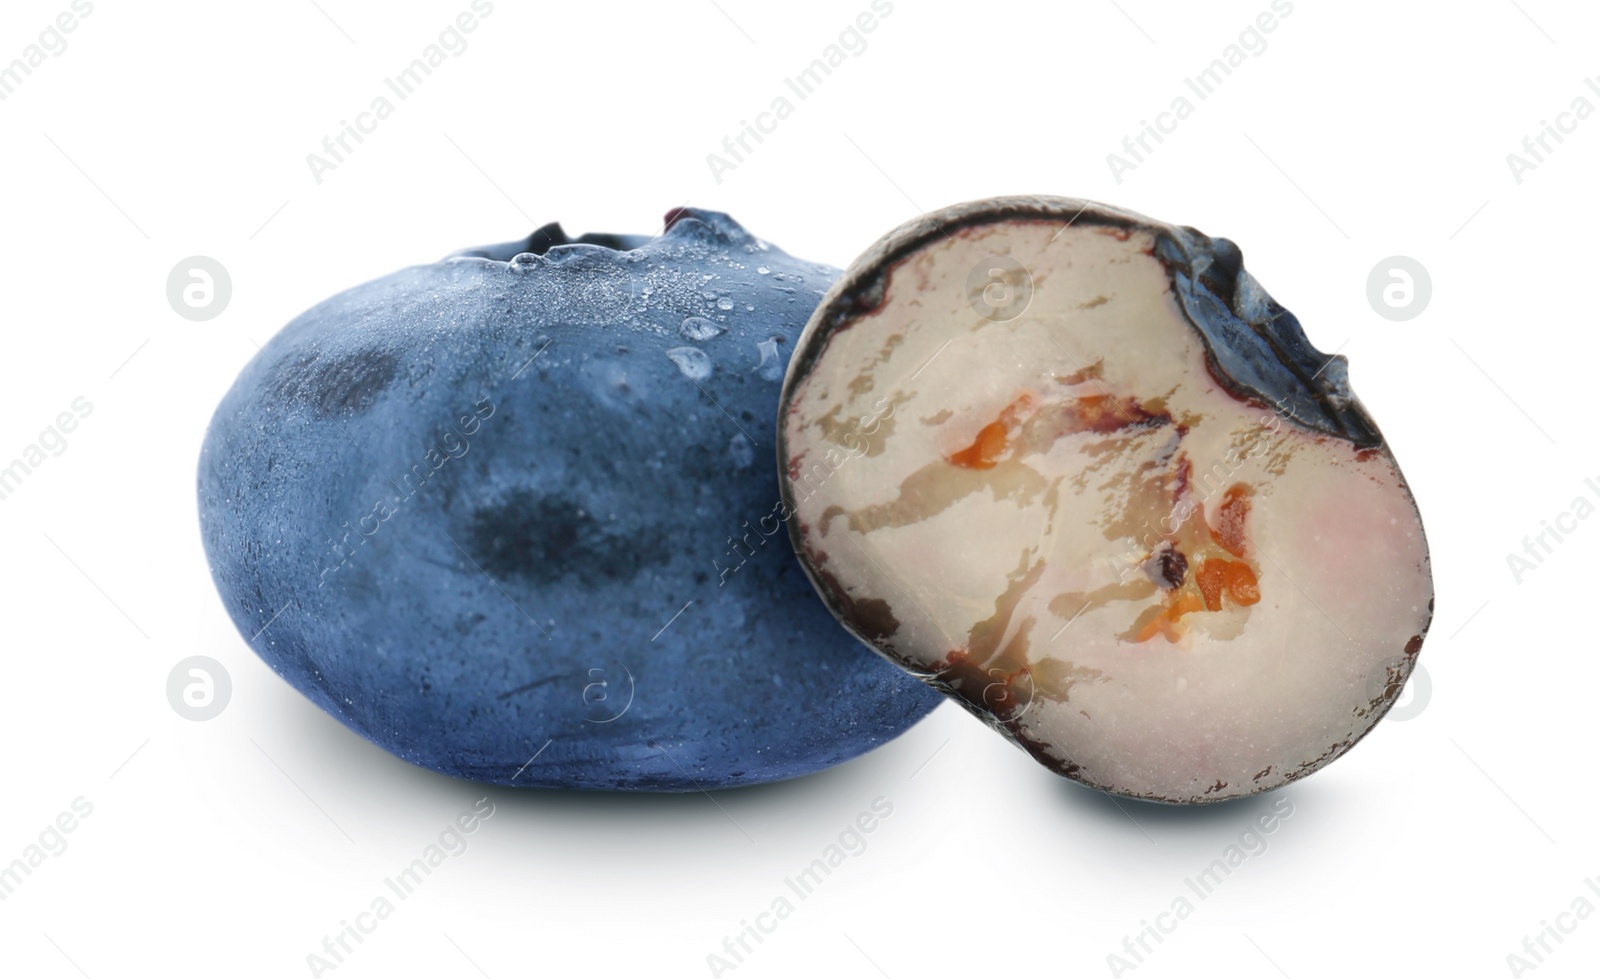 Image of Cut and whole blueberries on white background